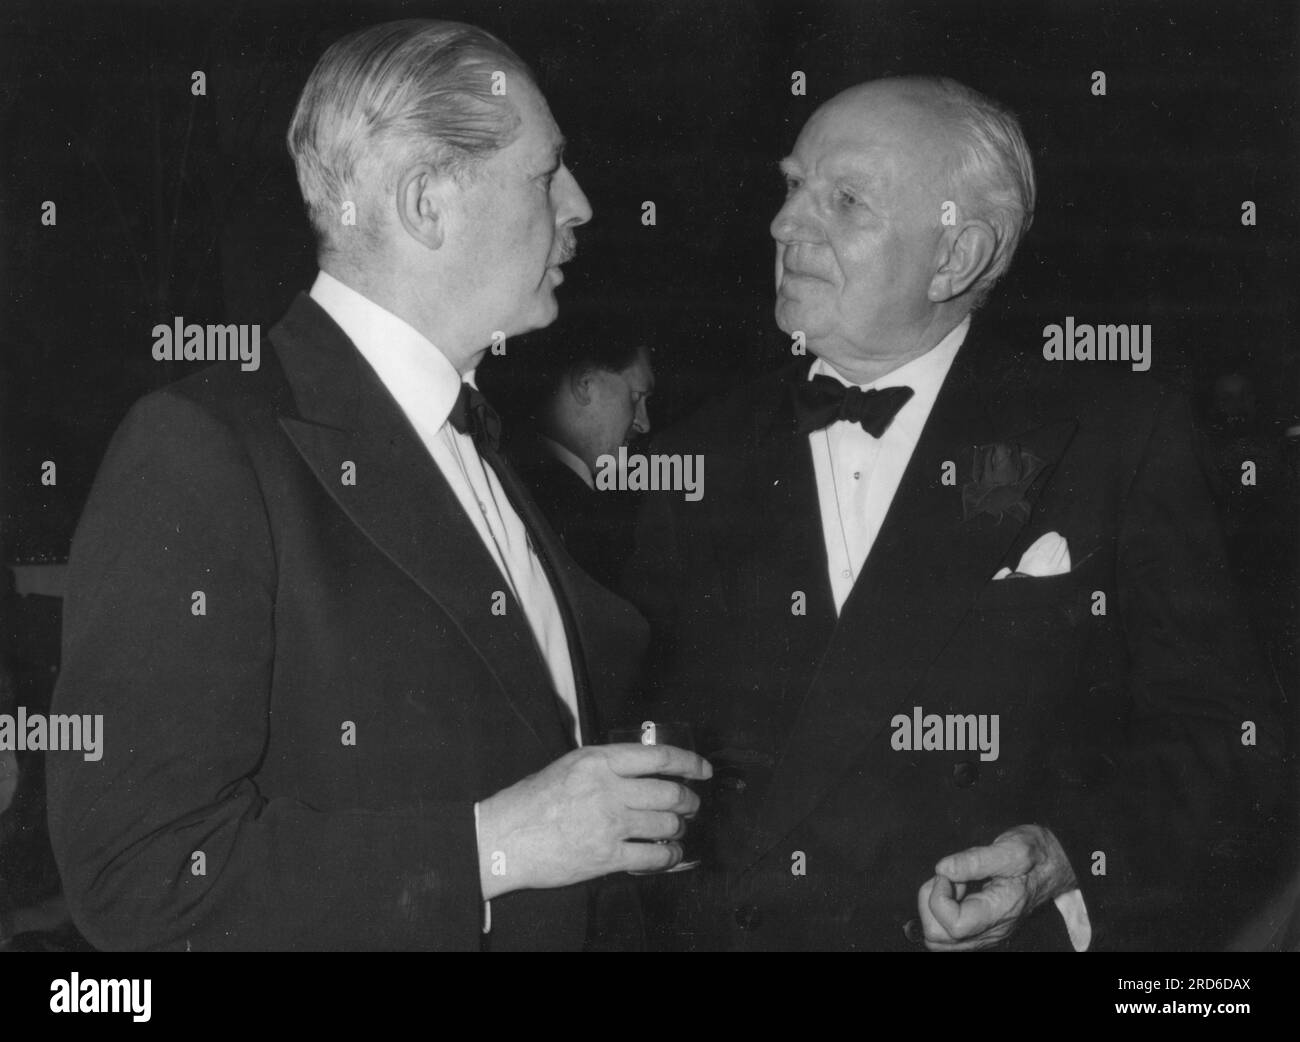 Macmillan, Harold, 10.2.1894 - 29.12.1986, britischer Politiker (Cons.), mit Lord Woolton, ADDITIONAL-RIGHTS-CLEARANCE-INFO-NOT-AVAILABLE Stockfoto